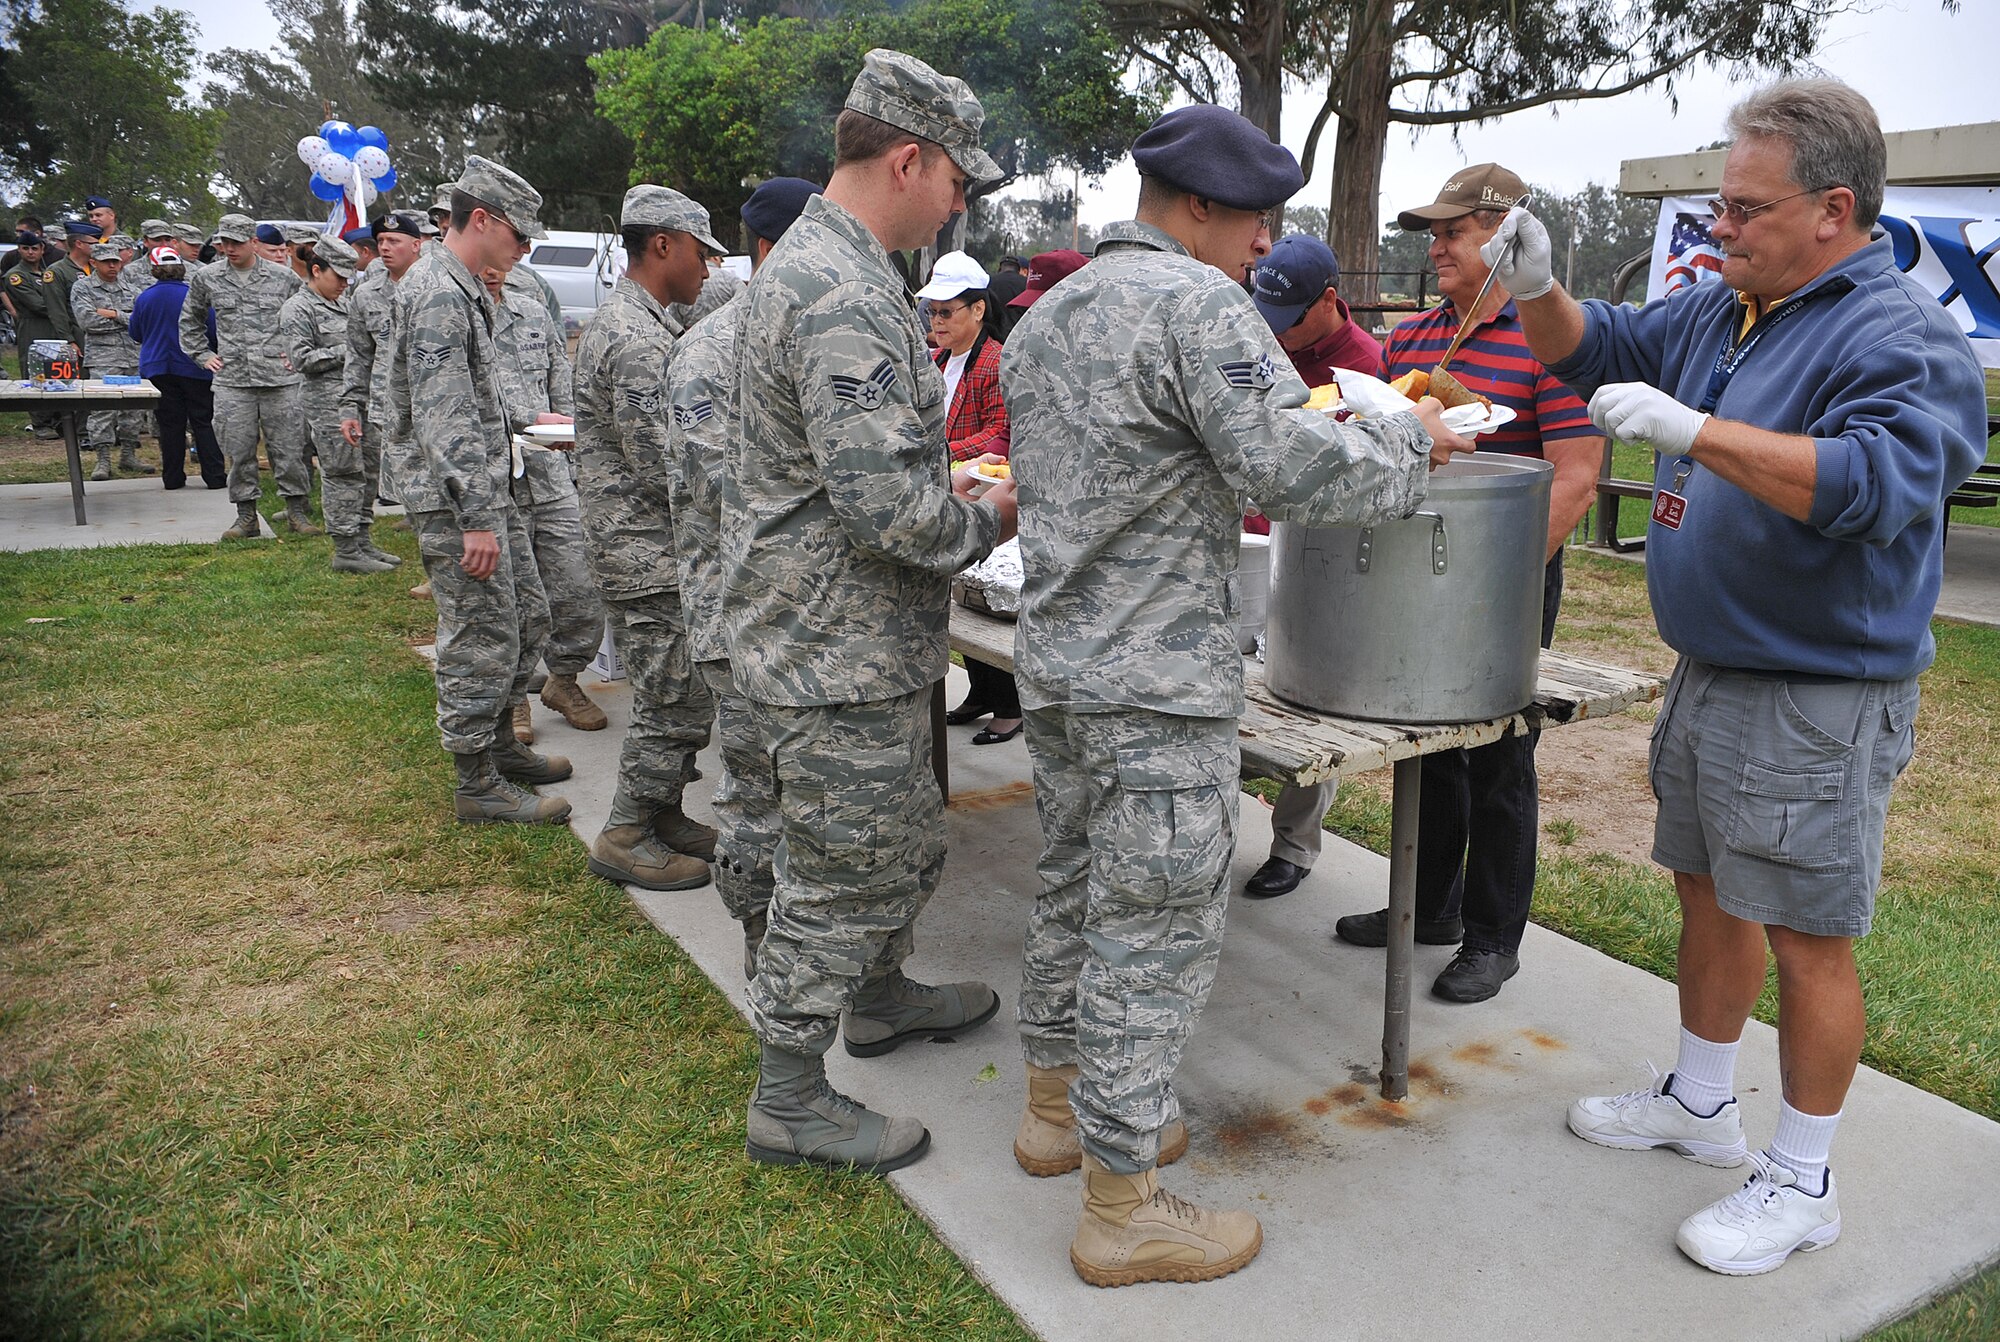 VANDENBERG AIR FORCE BASE, Calif. -- With hungry stomachs and hungry eyes, Airman and members of Team V line up to get a free plate during the Airmen Appreciation Barbecue here Friday, July 16, 2010.(U.S. Air Force photo/Senior Airman Andrew Lee)